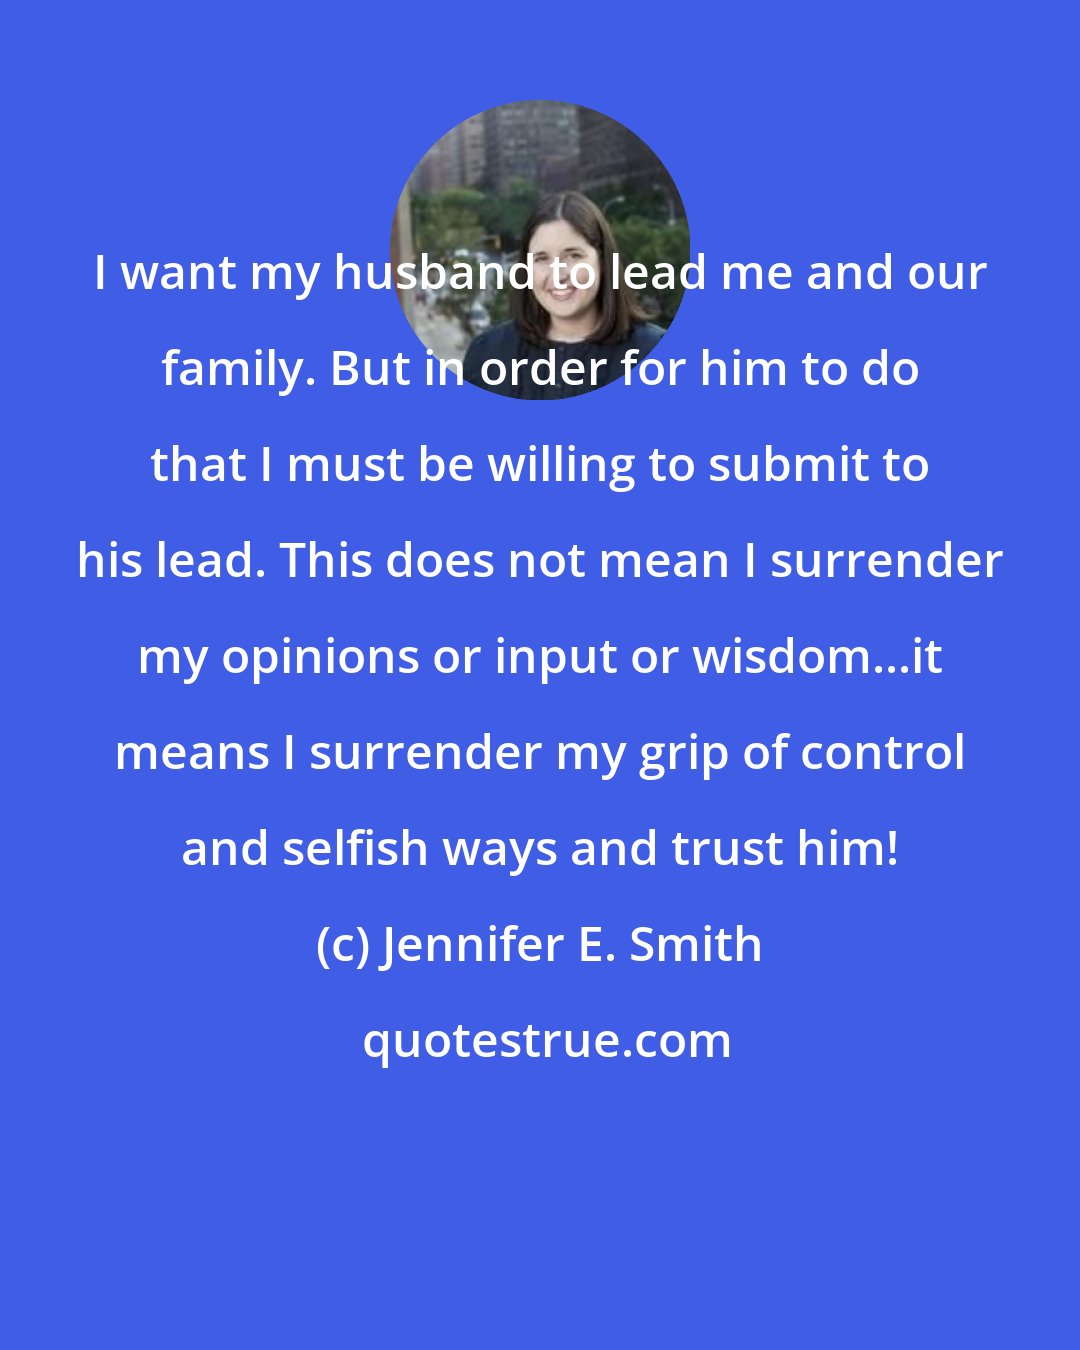 Jennifer E. Smith: I want my husband to lead me and our family. But in order for him to do that I must be willing to submit to his lead. This does not mean I surrender my opinions or input or wisdom...it means I surrender my grip of control and selfish ways and trust him!